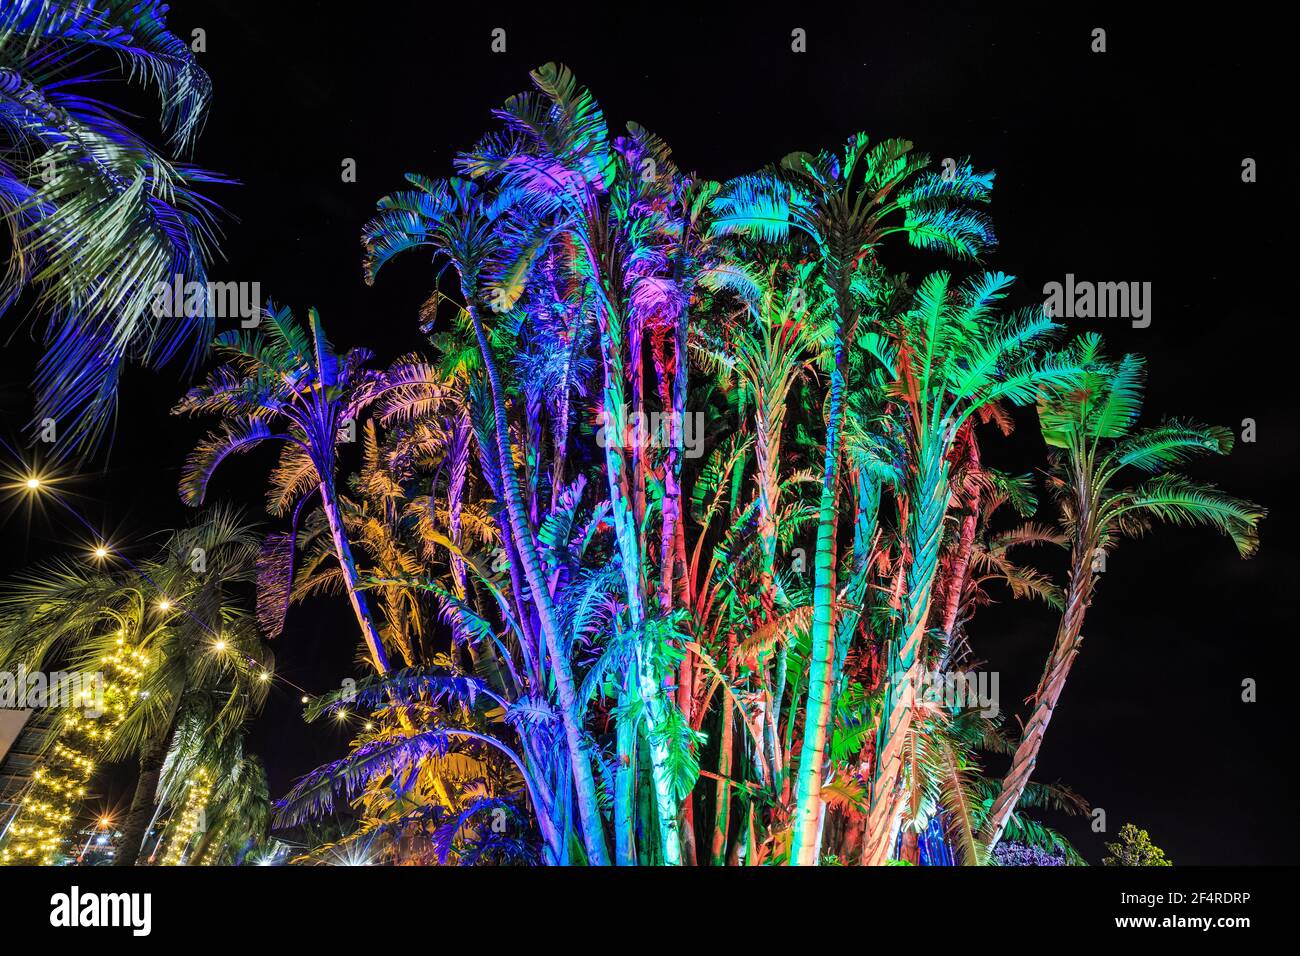 A Group Of Palm Trees In A Park At Night Beautifully Illuminated With